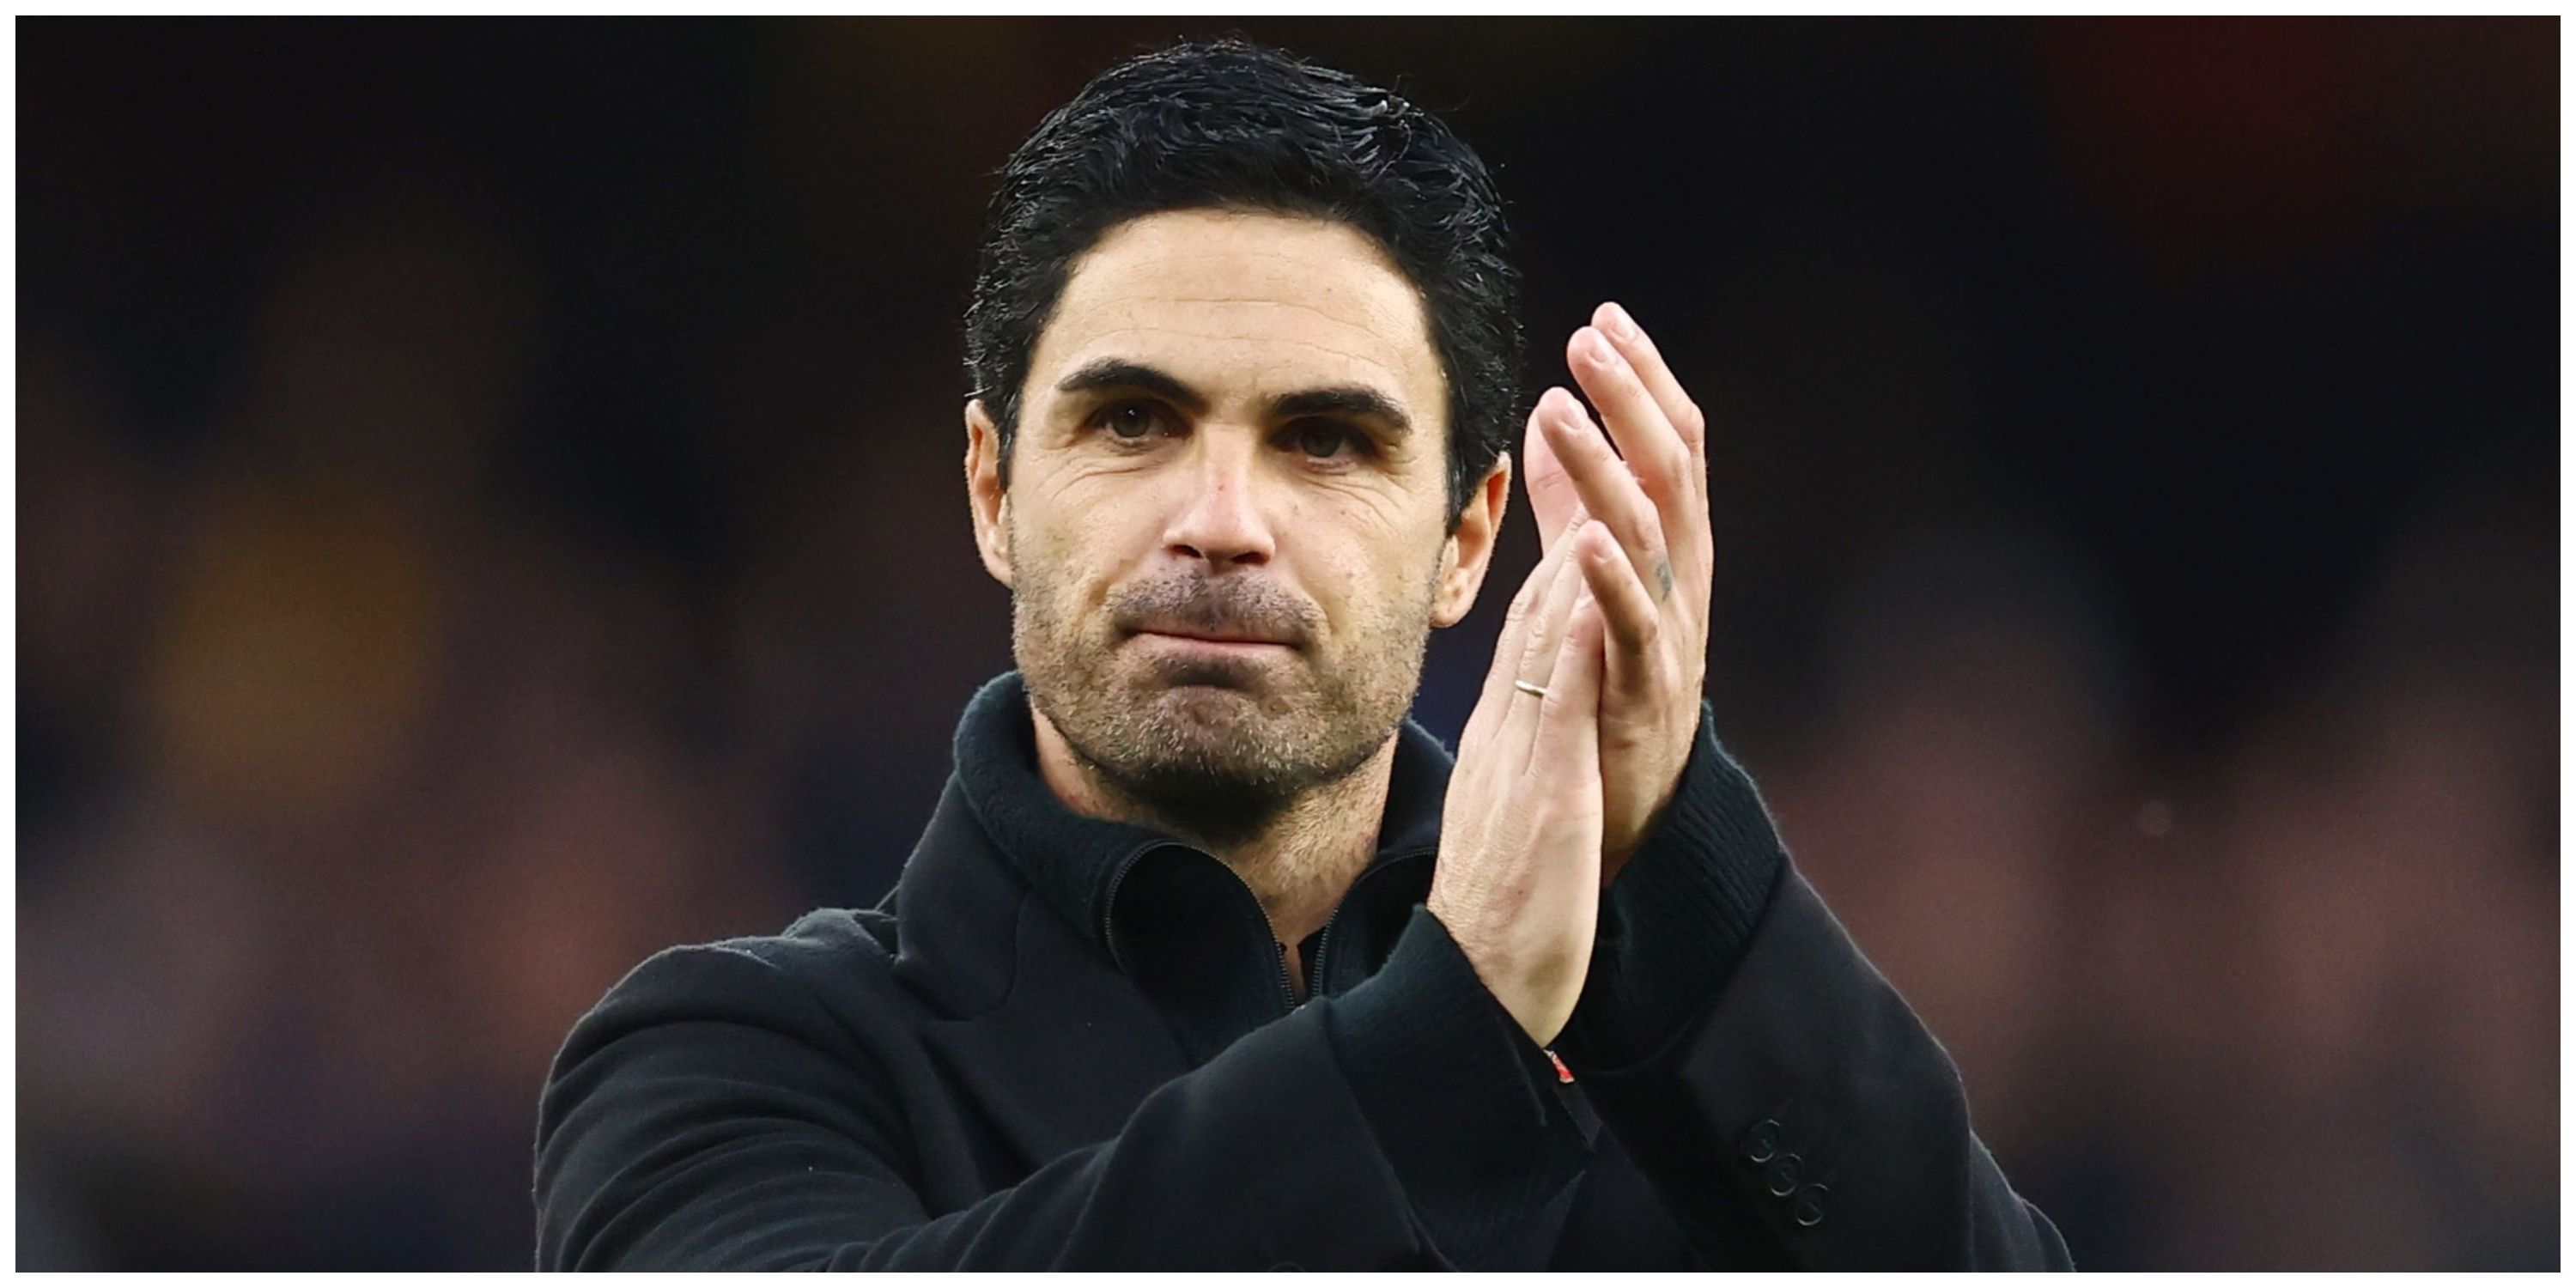 Arsenal manager Mikel Arteta clapping